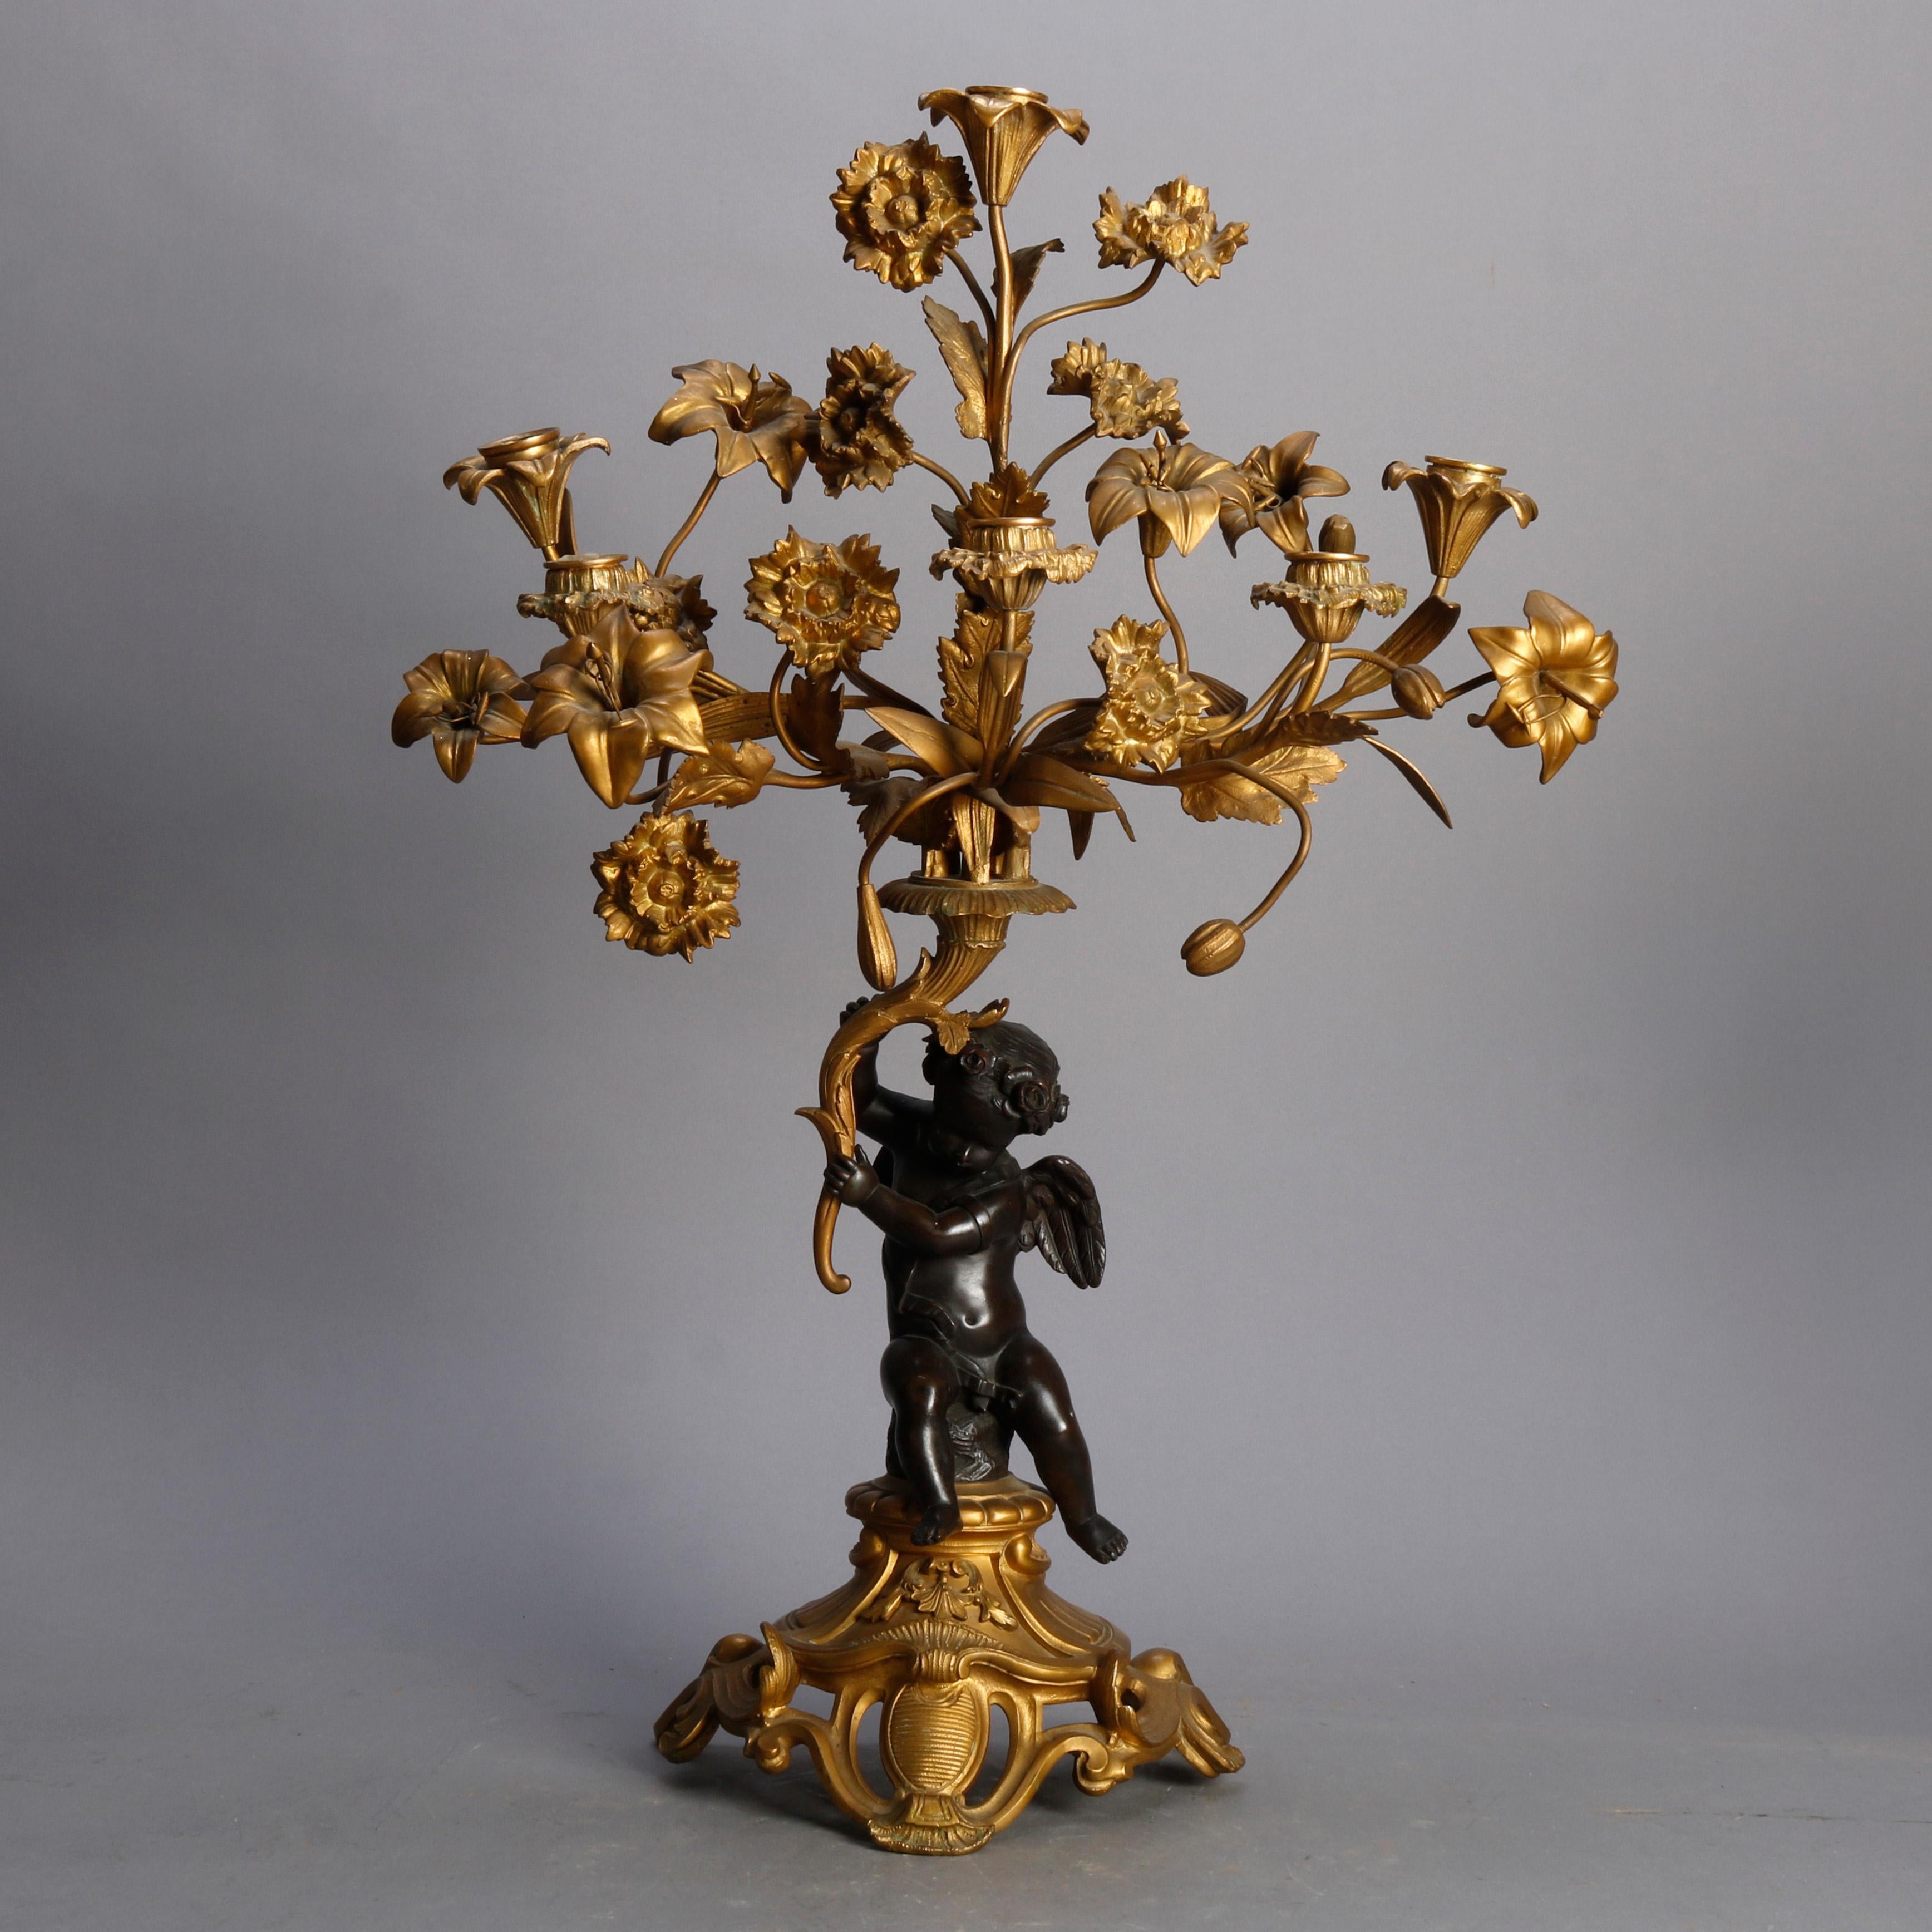 An antique pair of French Rococo figural parcel-gilt candelabra offer gilt metal foliate and floral form arms terminating in candle sockets surmounting Classical cherub form columns and raised gilt pierced scroll and foliate from bases, 19th